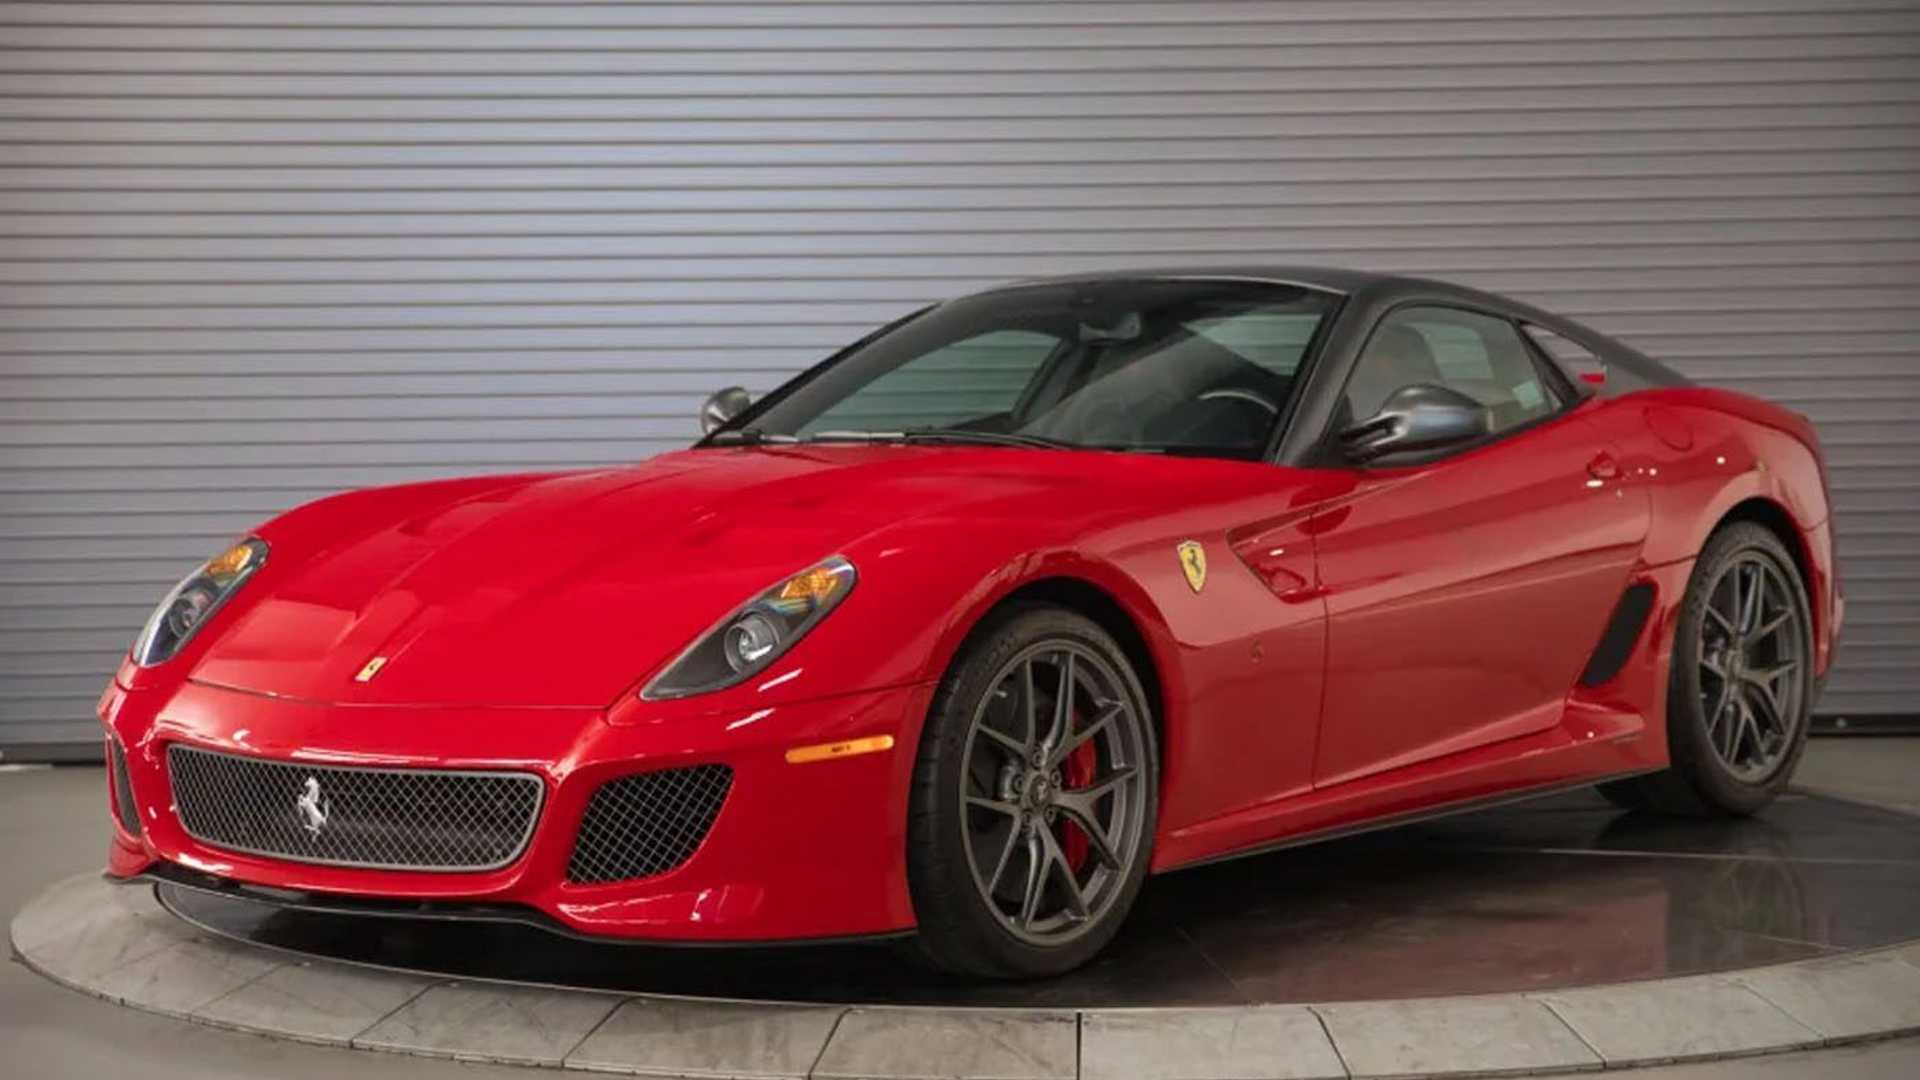 Why This 2011 Ferrari 599 GTO For Sale Is Worth Over A Million Dollars